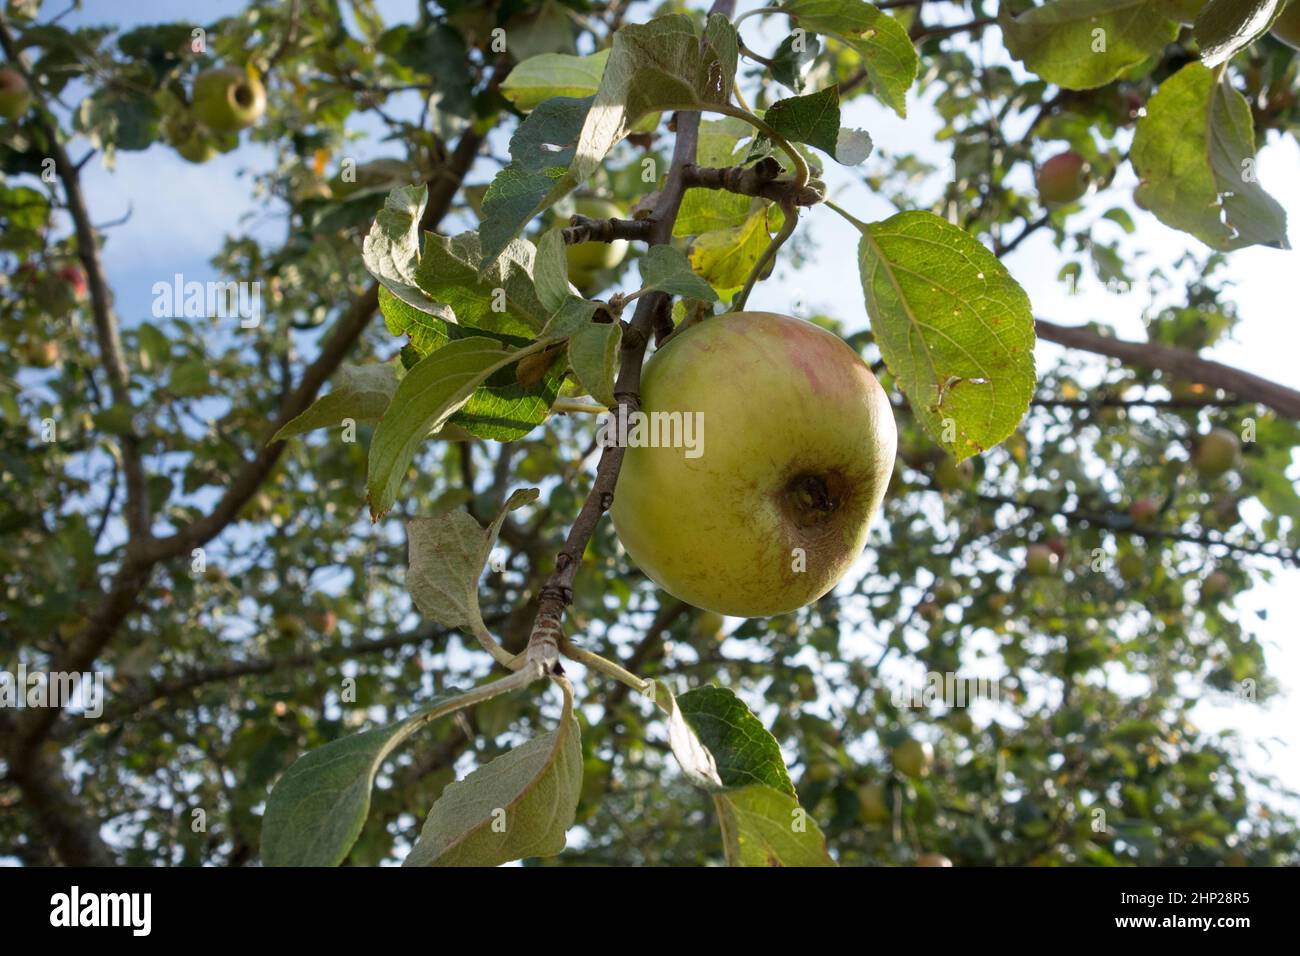 apple tree with fresh fruits hanging, healthy and natural food Stock Photo